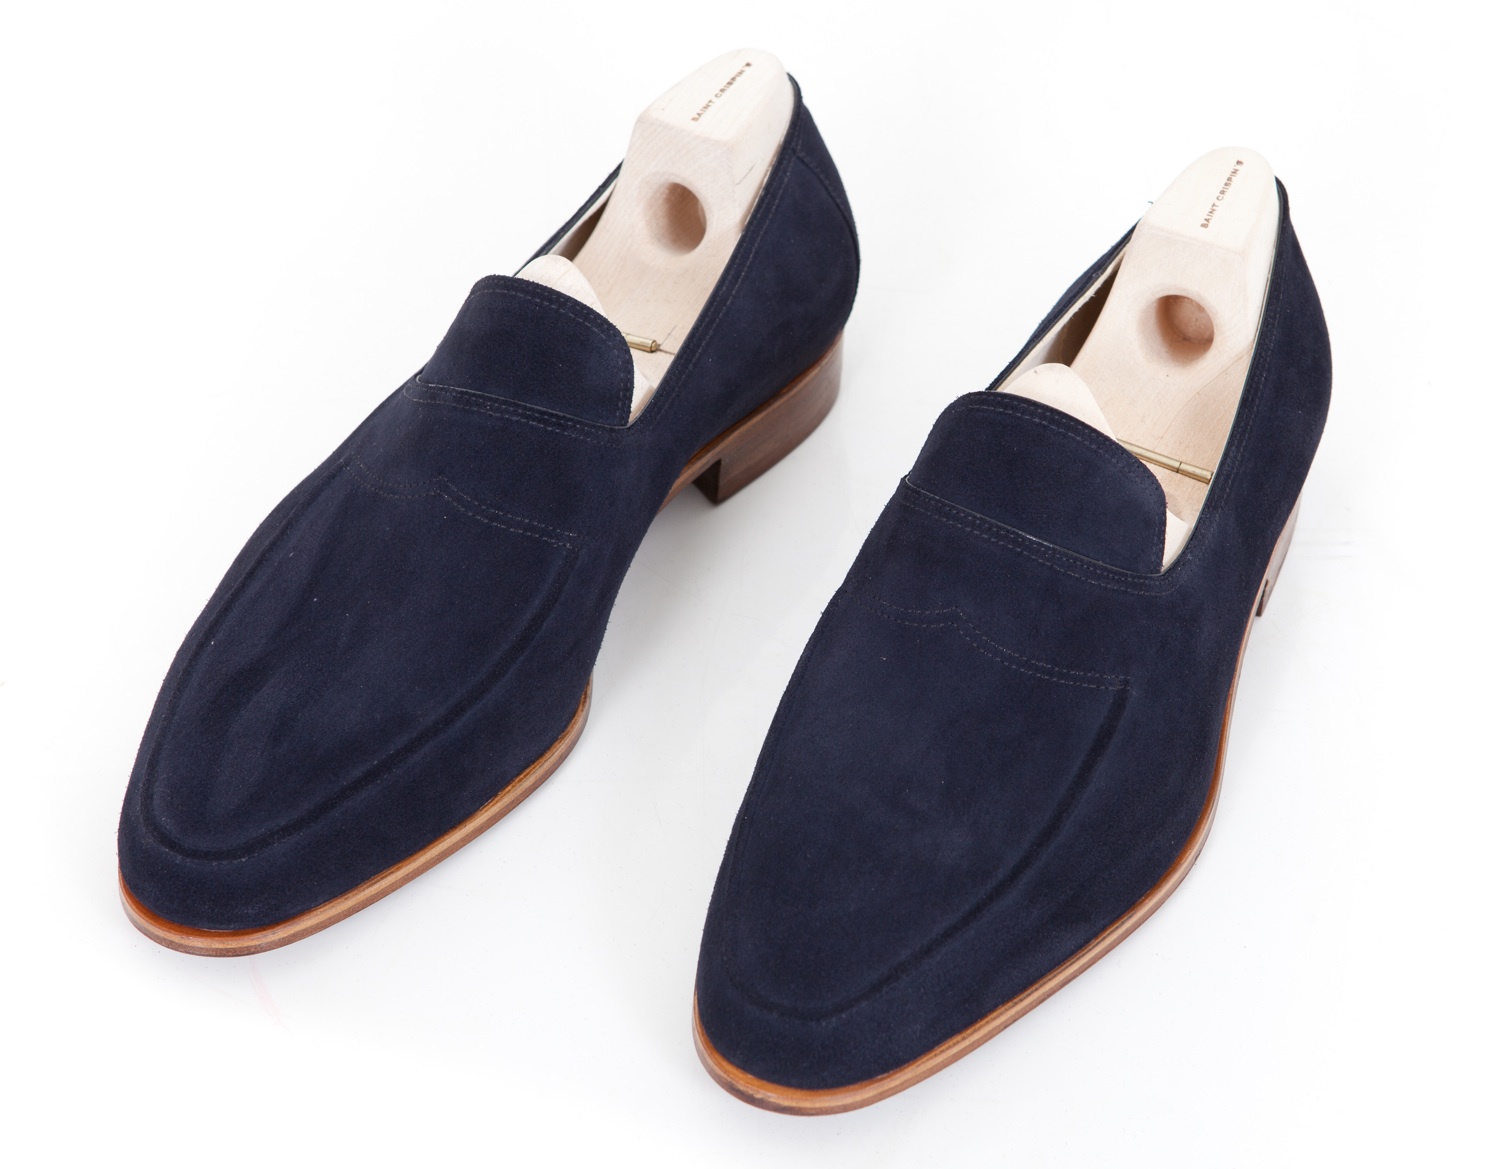 The Shoe AristoCat: Saint Crispin's blue loafers for the Spring / Summer